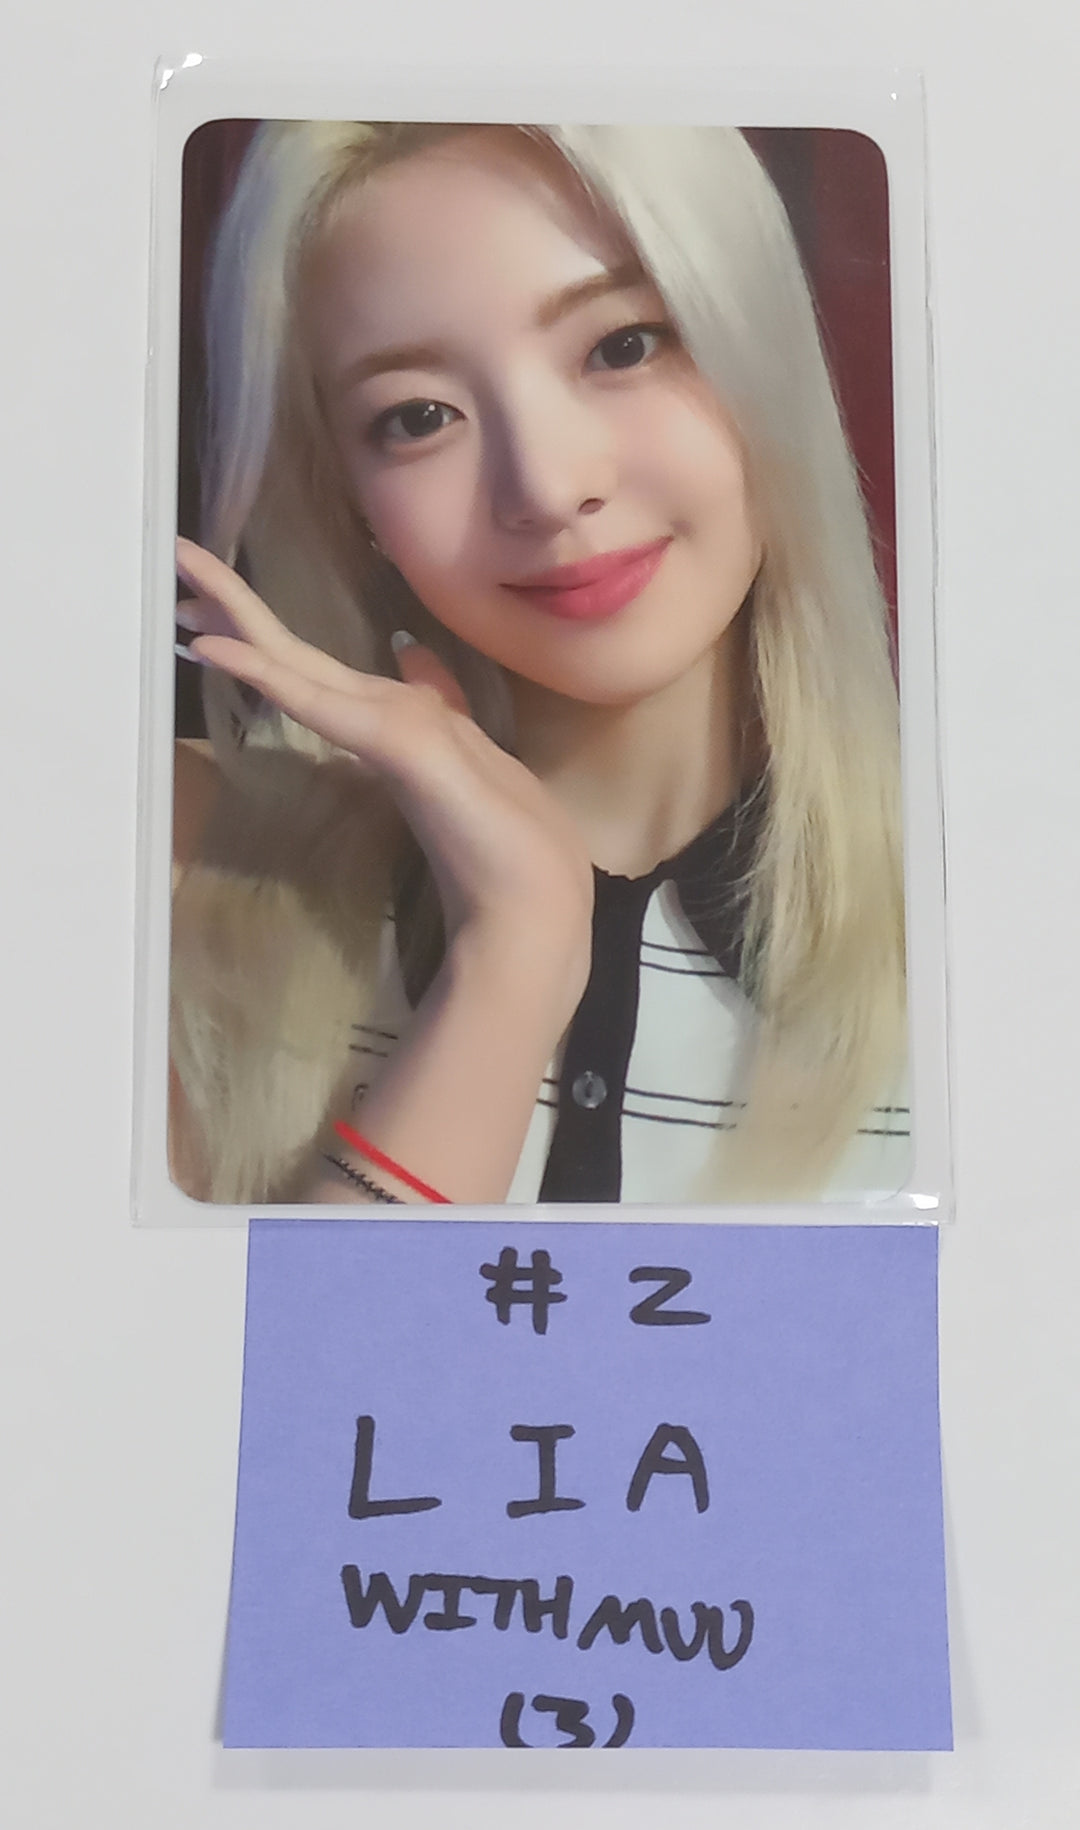 ITZY "KILL MY DOUBT" - Withmuu Fansign Event Photocard Round 7 [23.09.19]